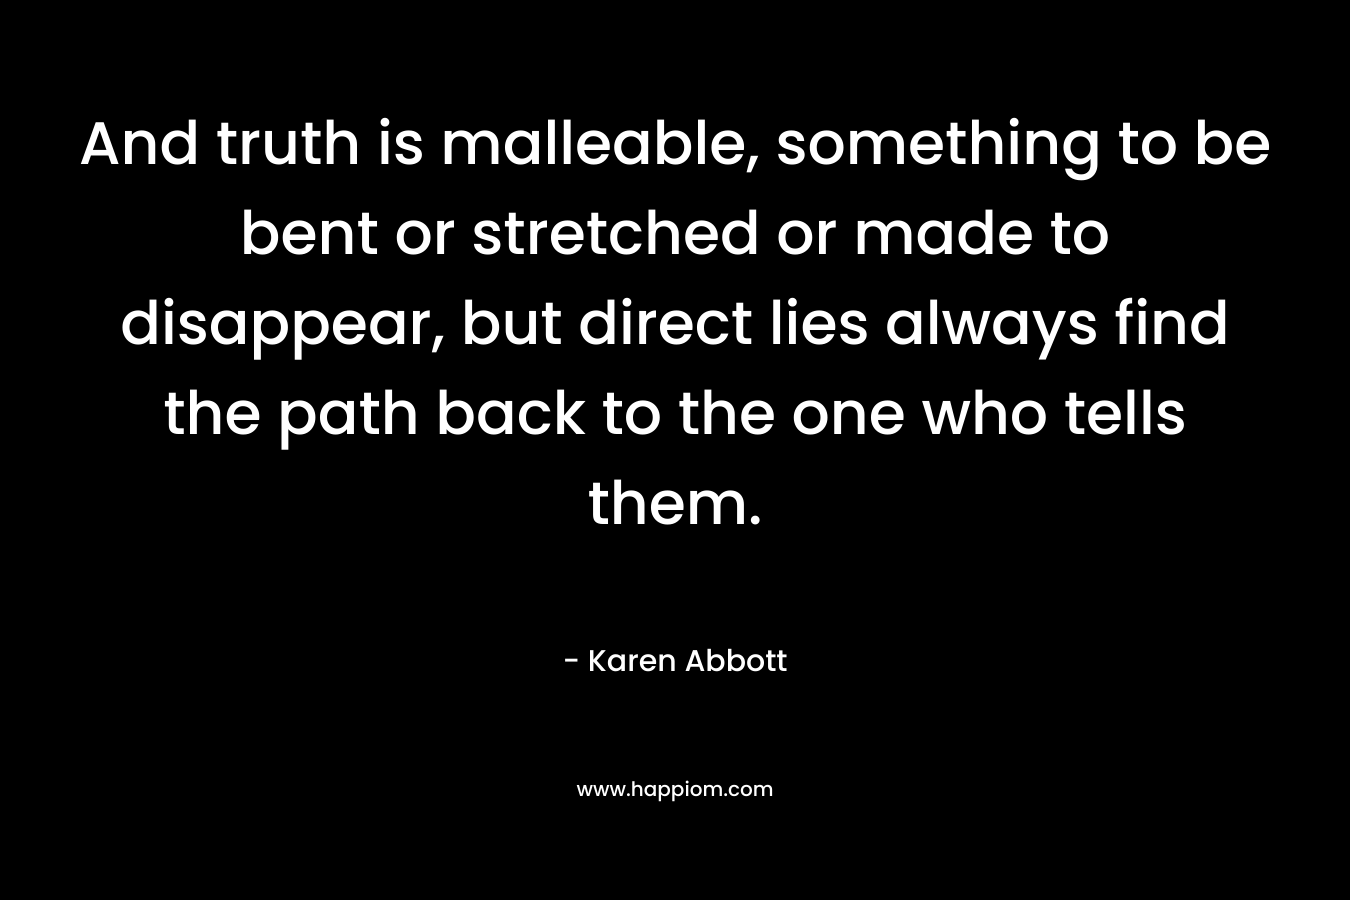 And truth is malleable, something to be bent or stretched or made to disappear, but direct lies always find the path back to the one who tells them. – Karen Abbott